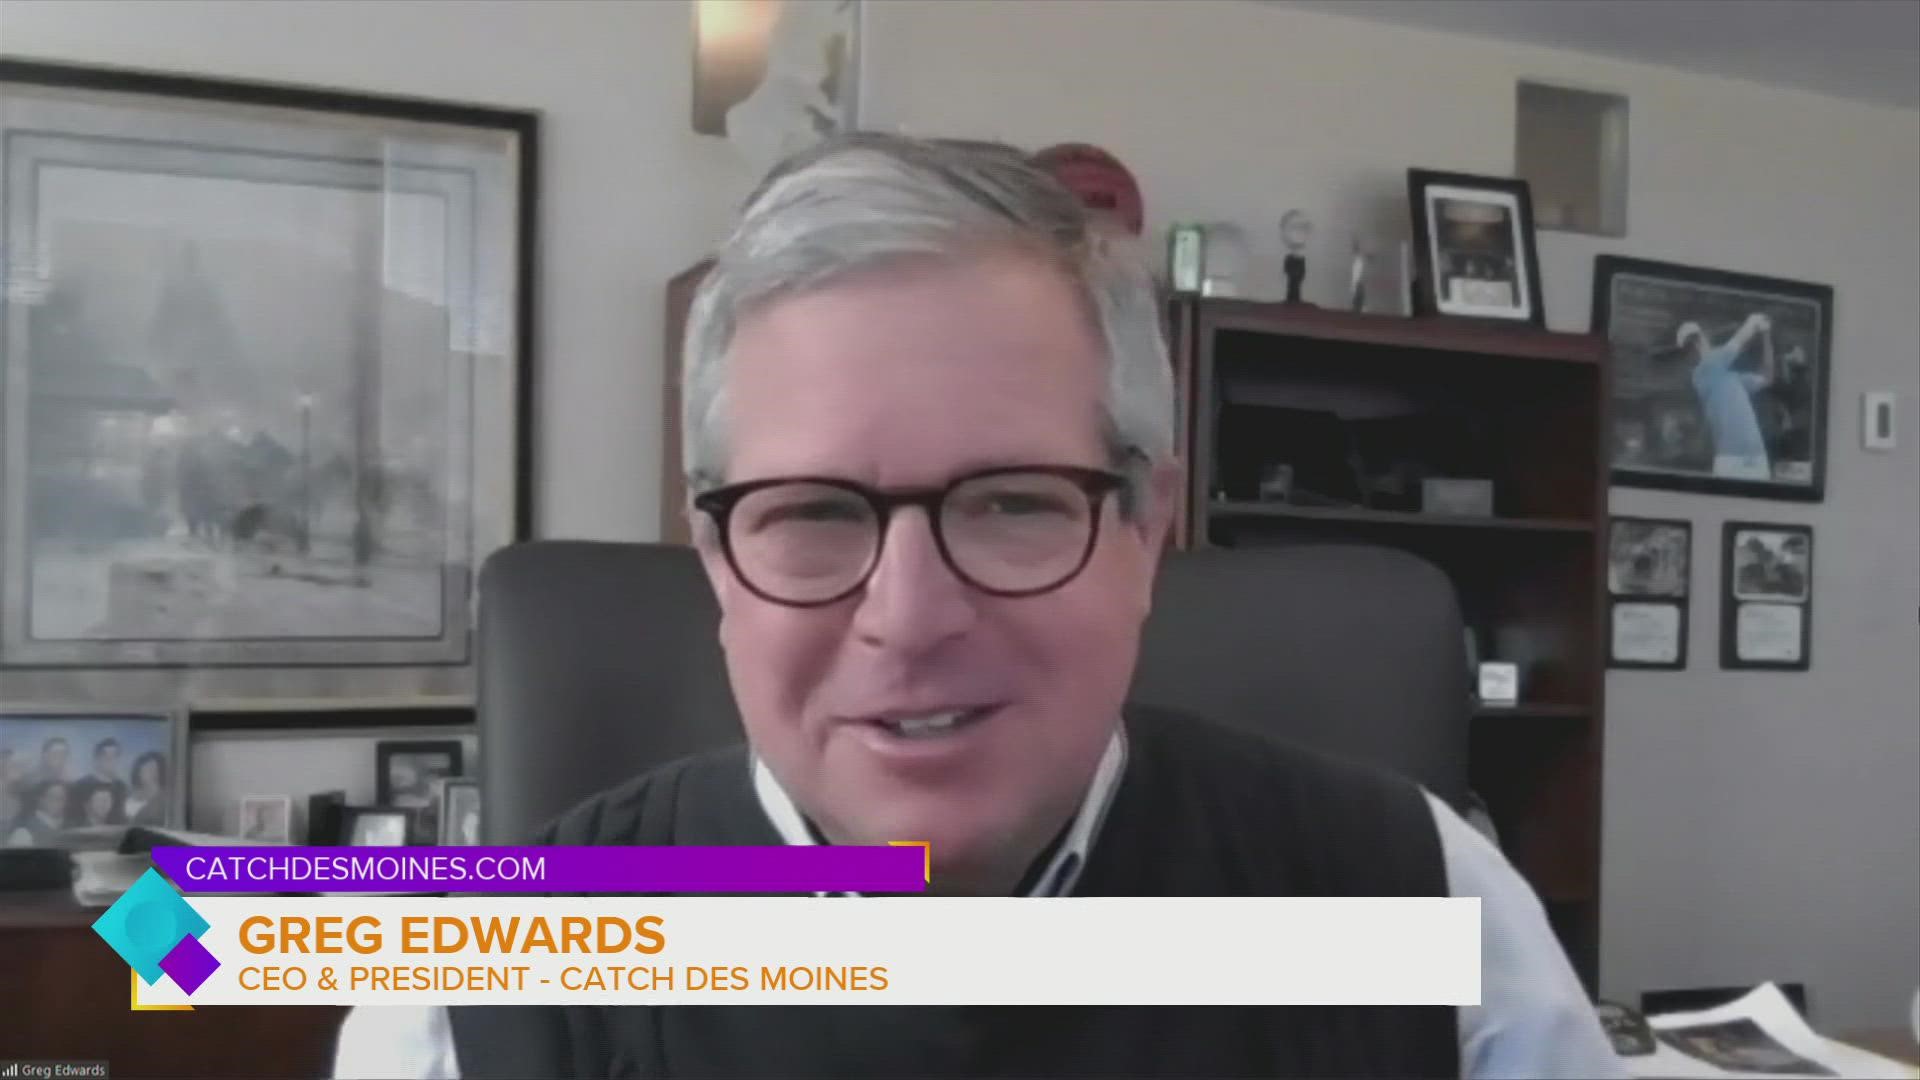 Greg Edwards, CEO/President-Catch Des Moines, talks about some of the cool things going on in Central Iowa this fall weekend!